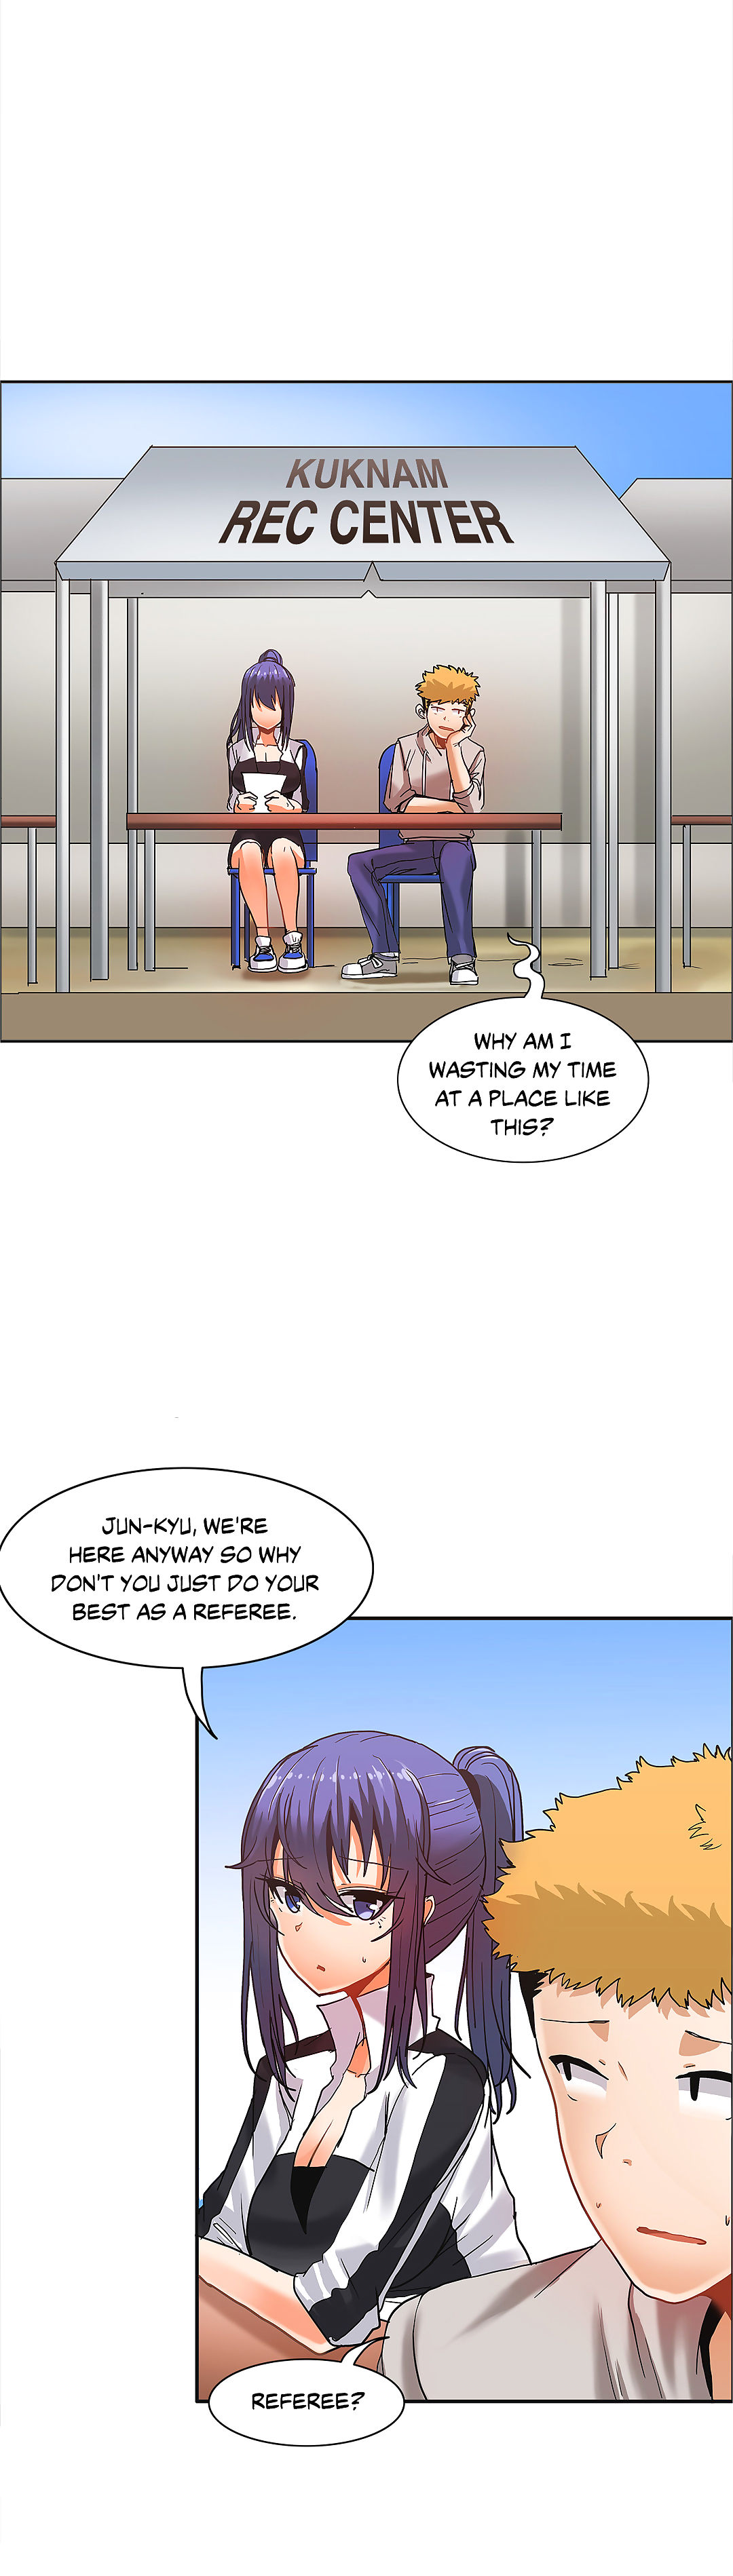 The Girl That Wet the Wall Ch 11 - 40 - part 12 page 1